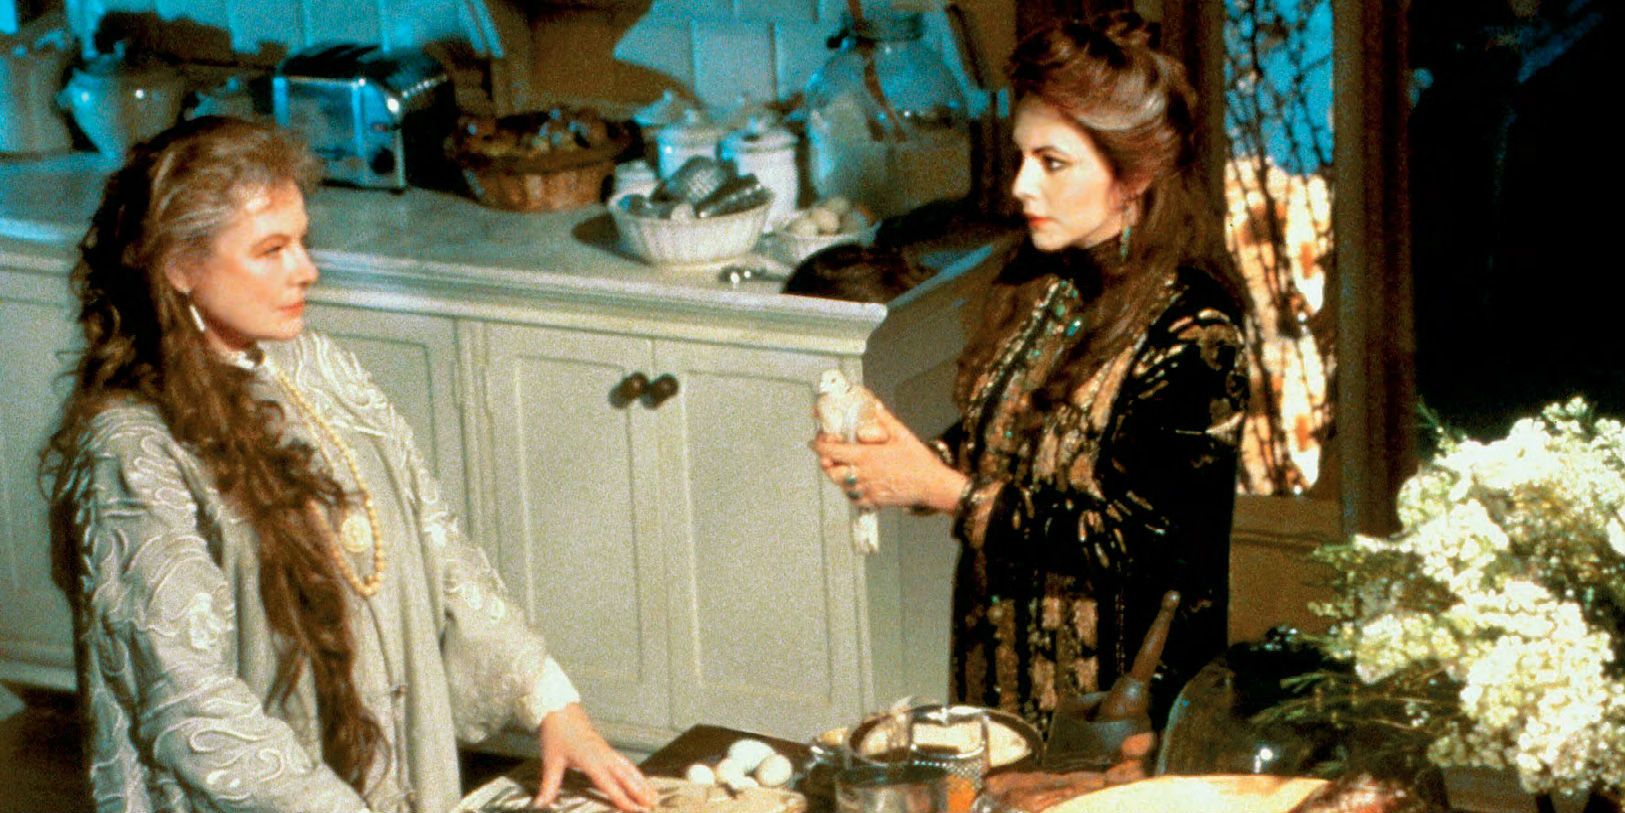 Dianne Wiest and Stockard Channing in Practical Magic